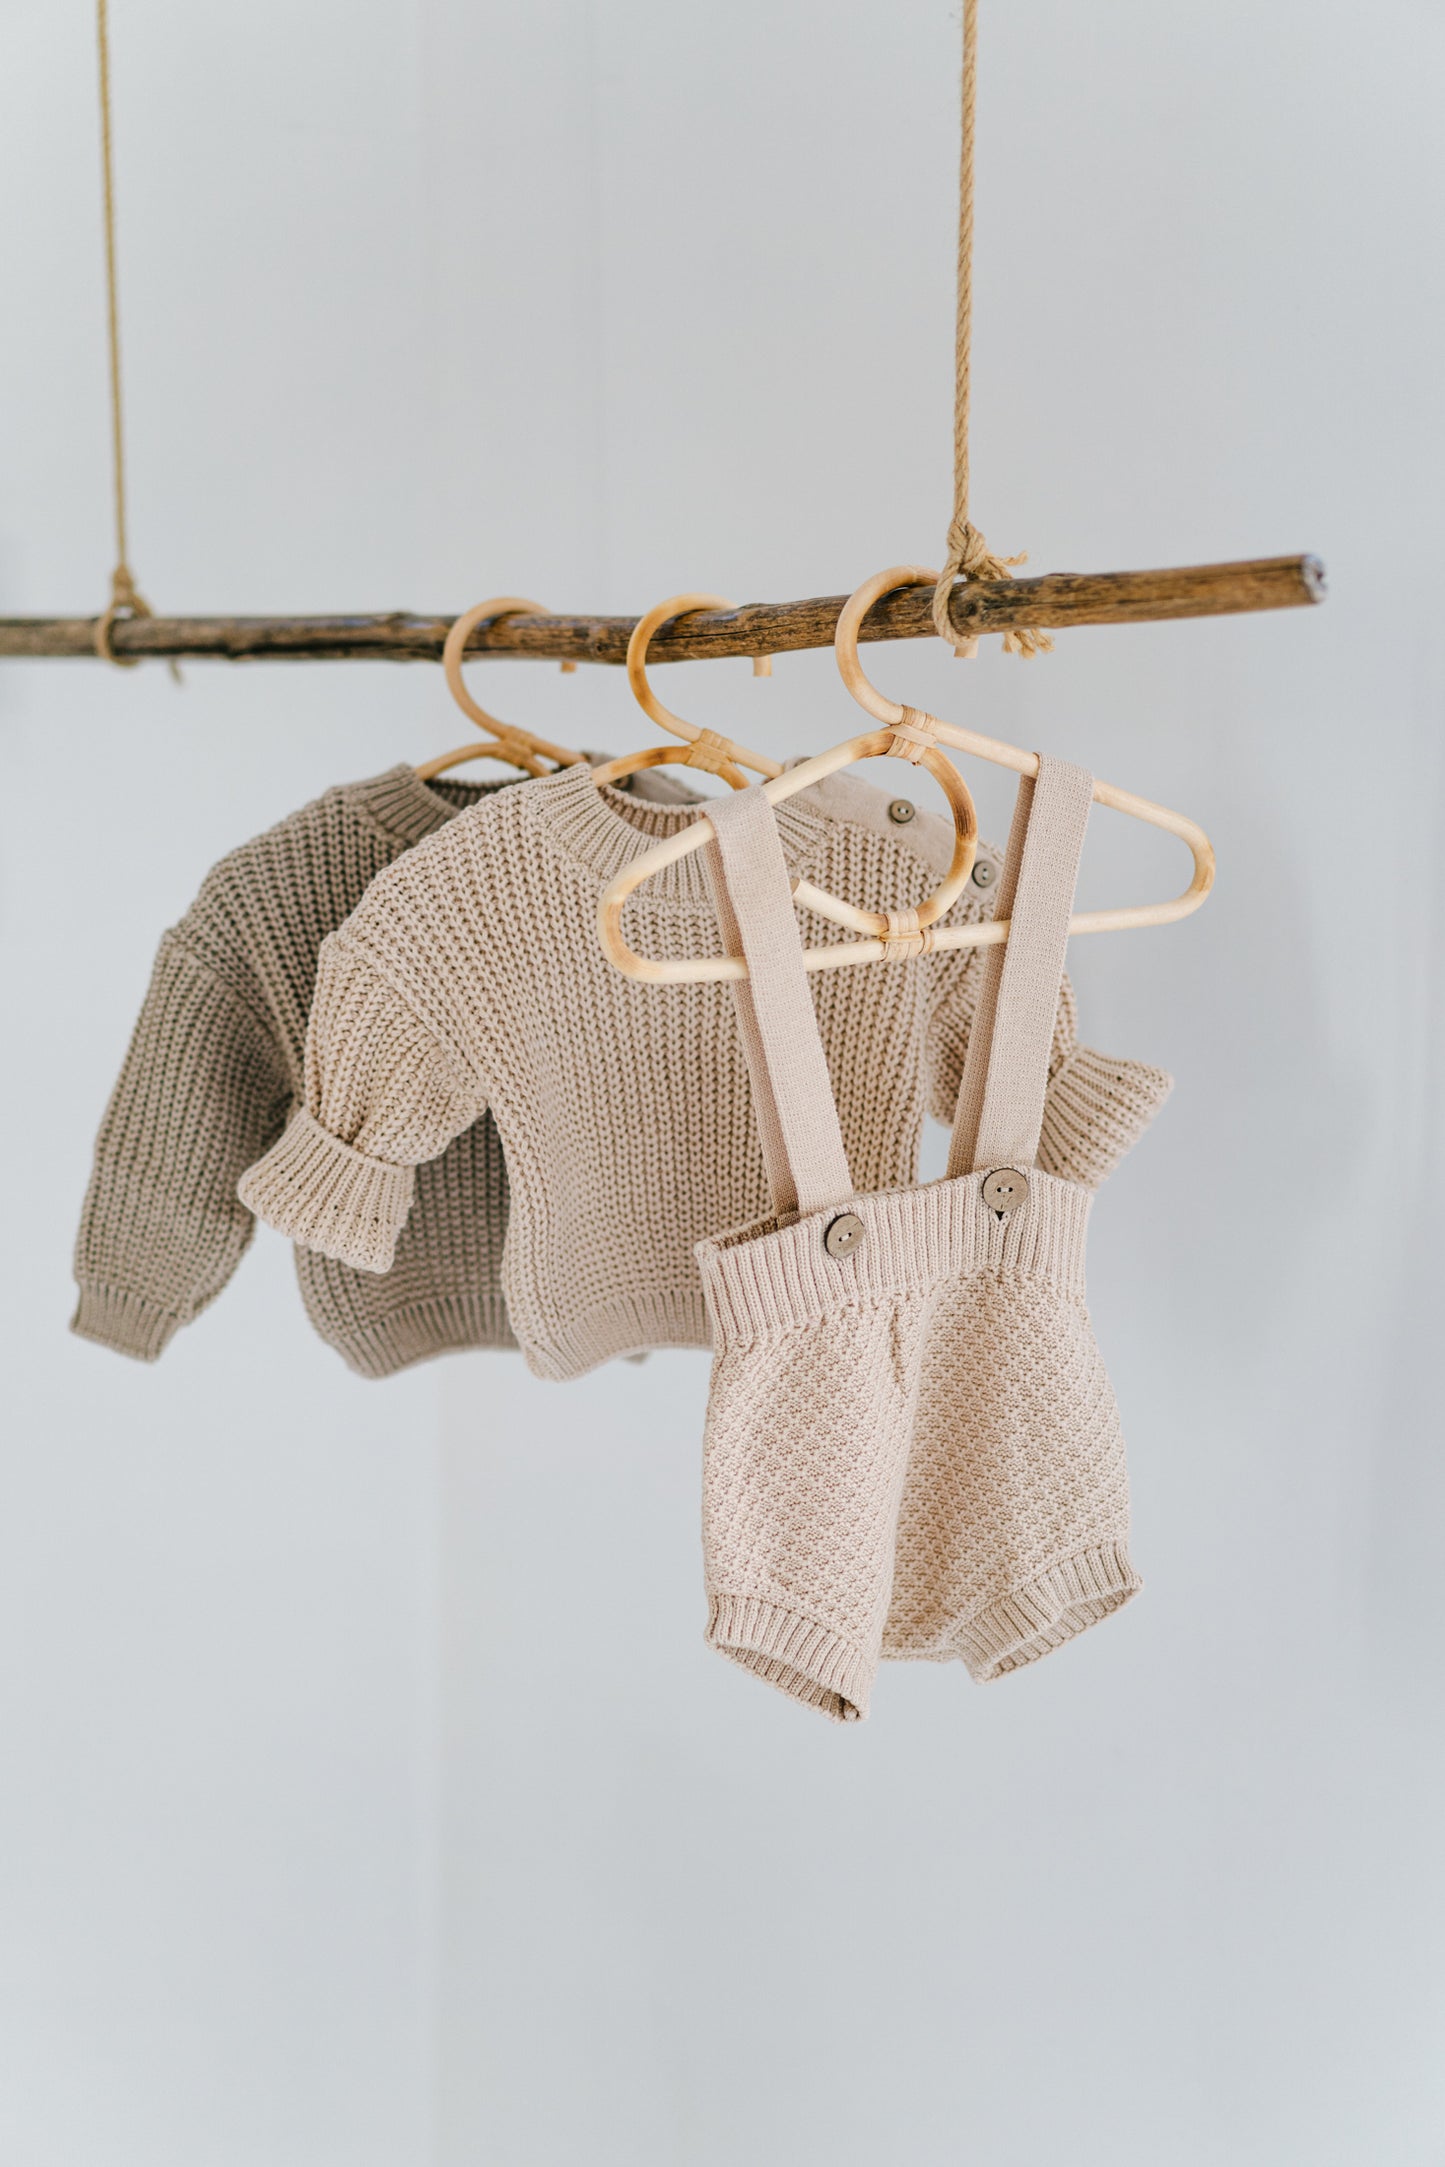 Newborn Take Me Home Outfit: Crochet Booties, Knit Bloomers and Oversized Chunky Sweater with Buttons on the Shoulder